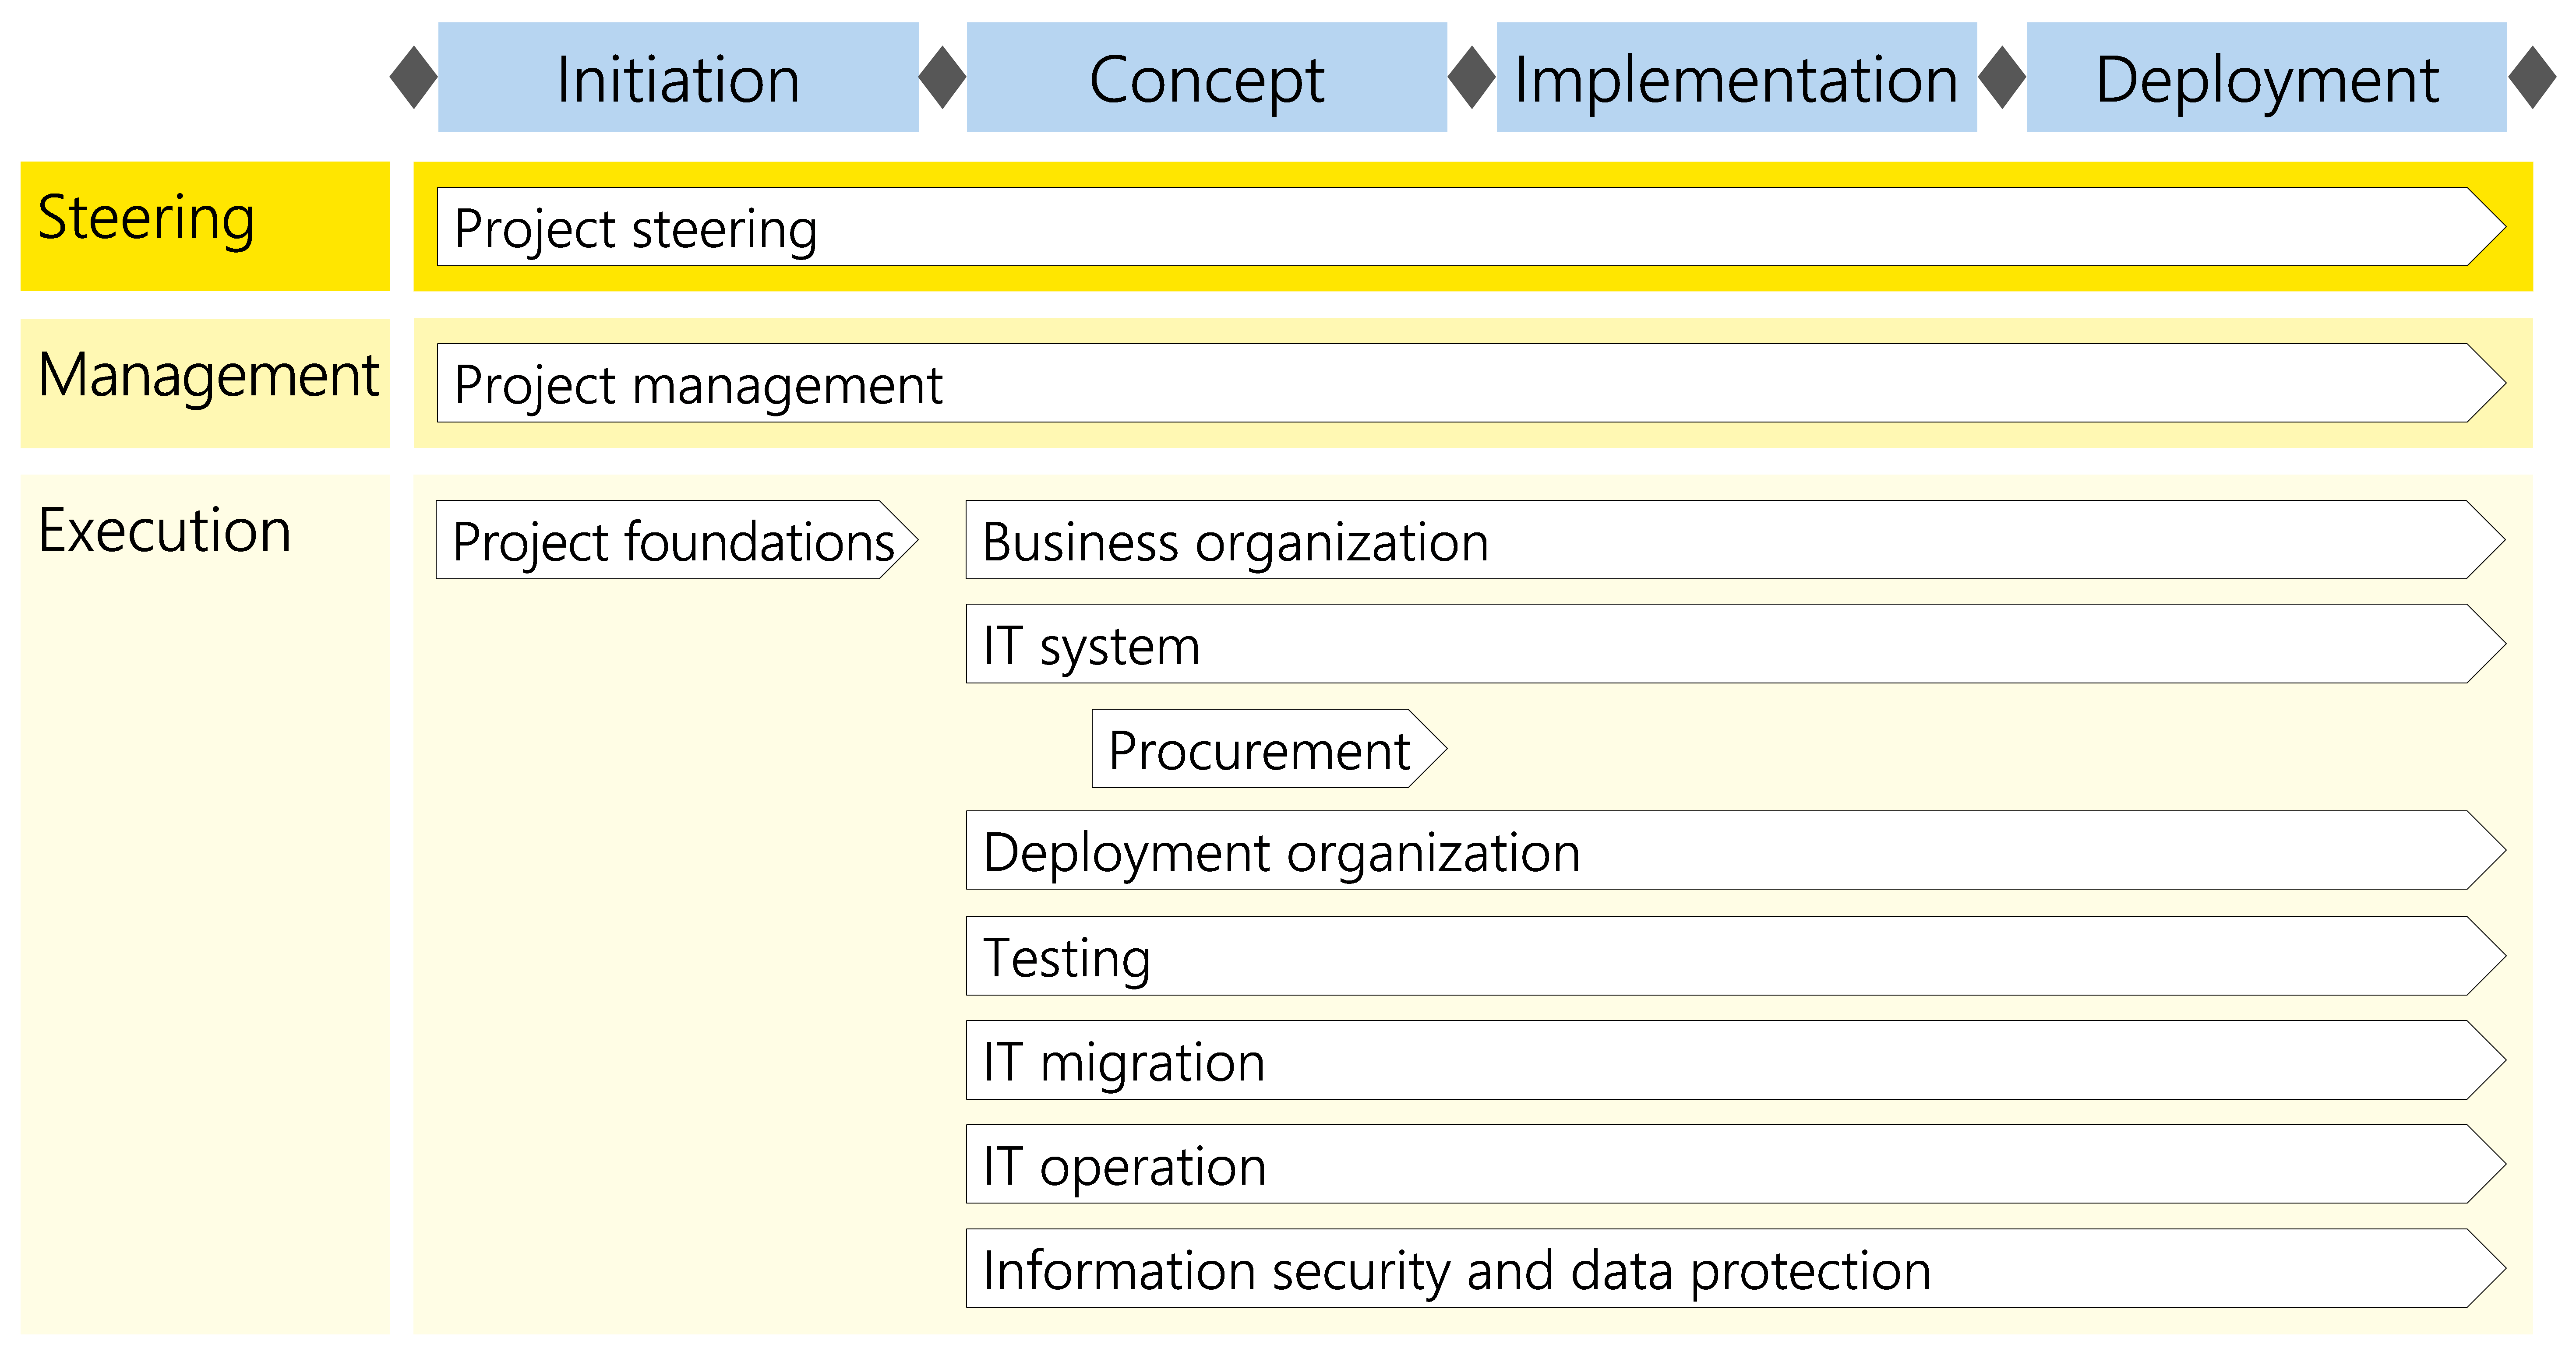 Figure 14: Modules in the context of the customized IT application scenario